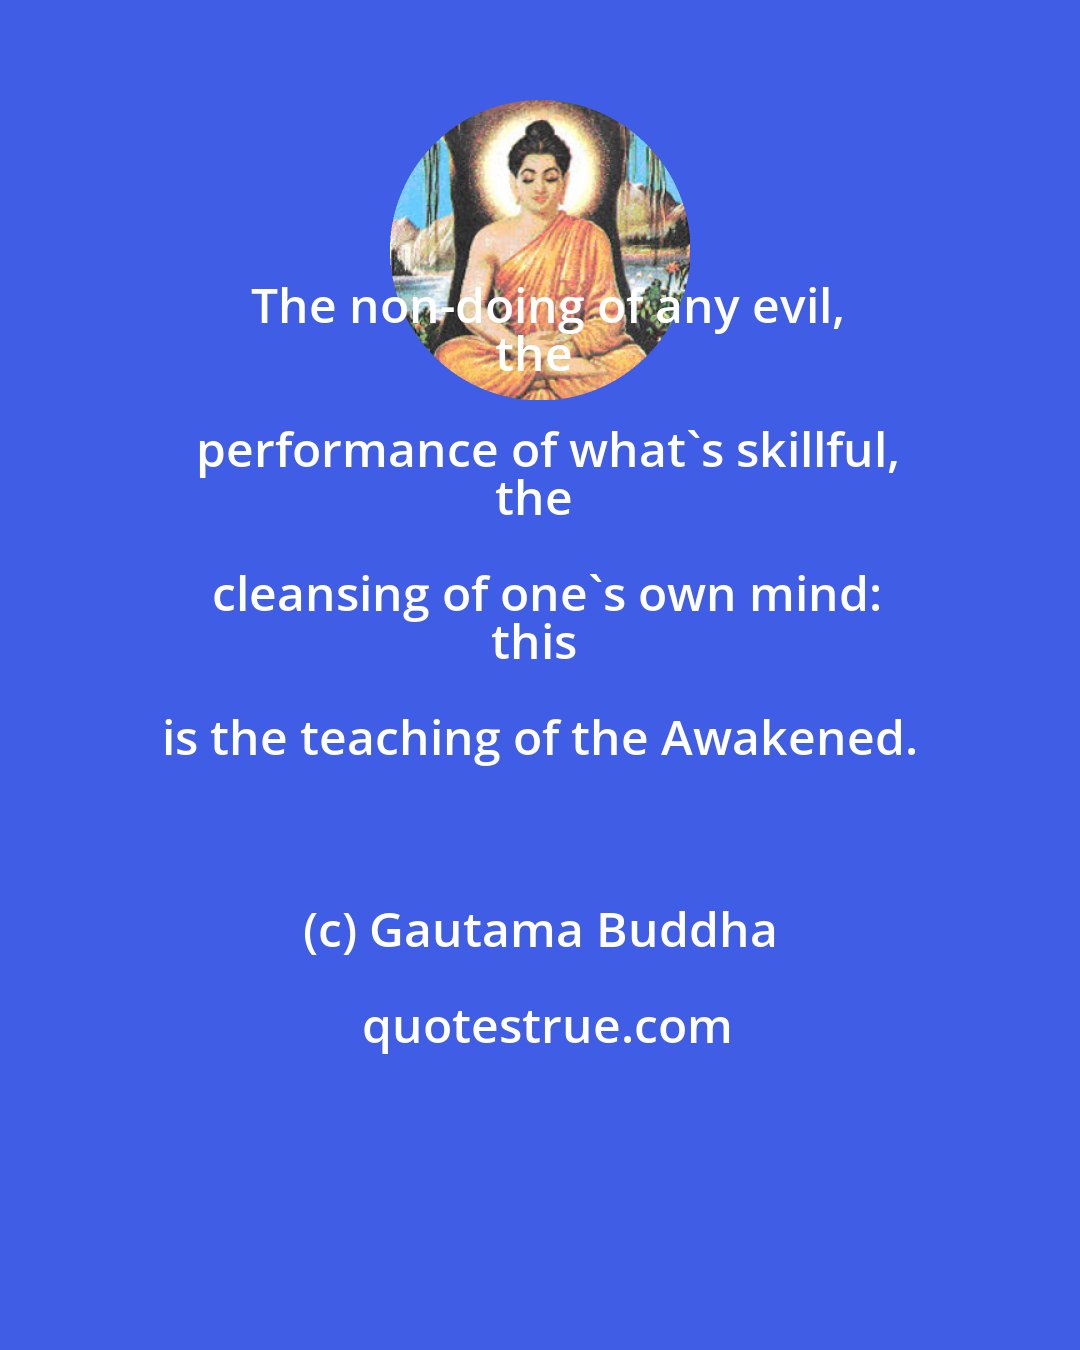 Gautama Buddha: The non-doing of any evil,
the performance of what's skillful,
the cleansing of one's own mind:
this is the teaching of the Awakened.